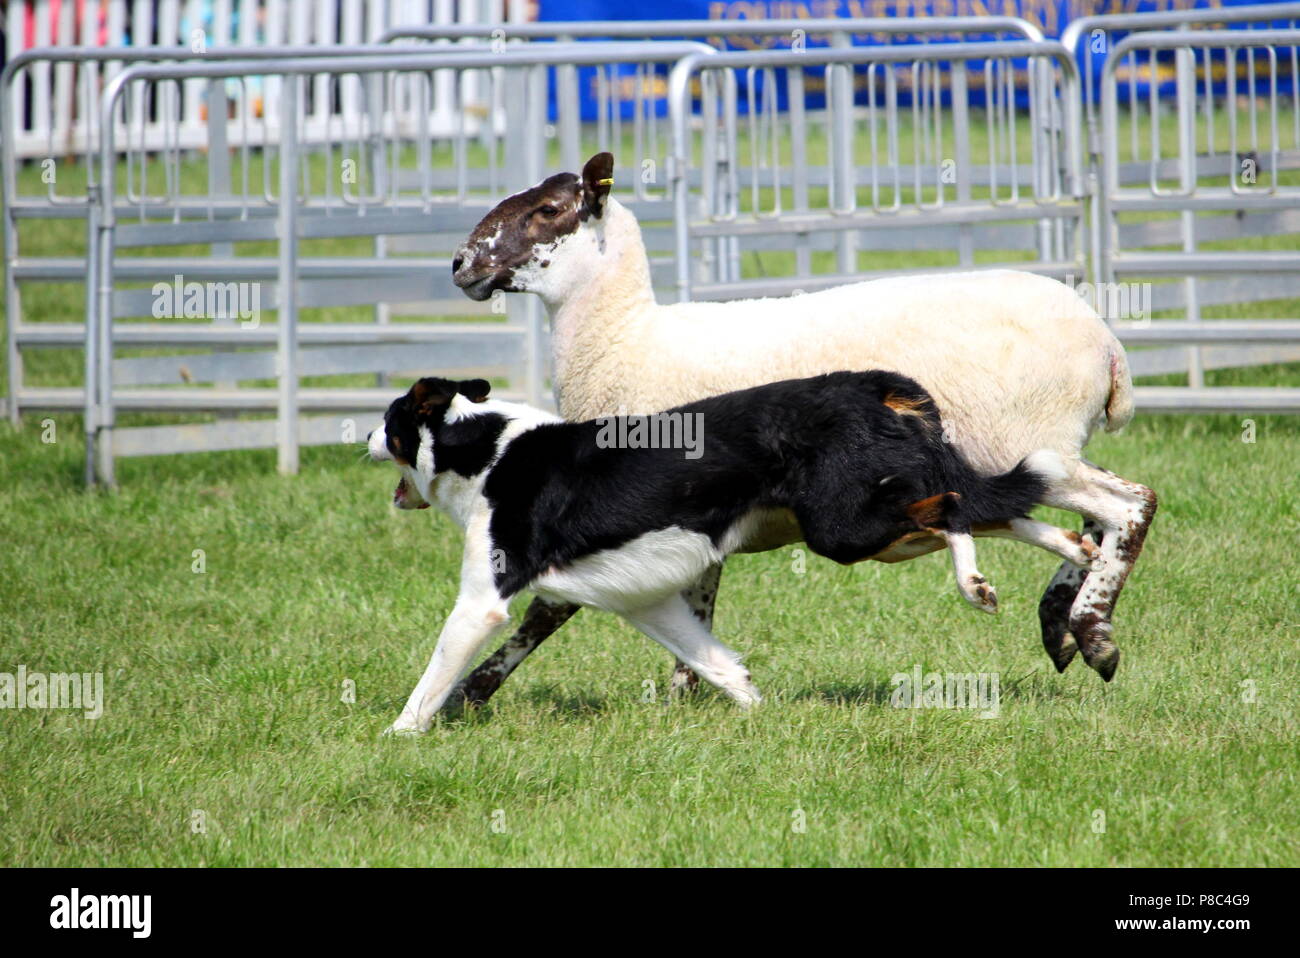 Sheep dog or Border Collie, also known as a Scottish Sheepdog, with distinctive black and white coat, running alongside a black faced sheep next to an Stock Photo